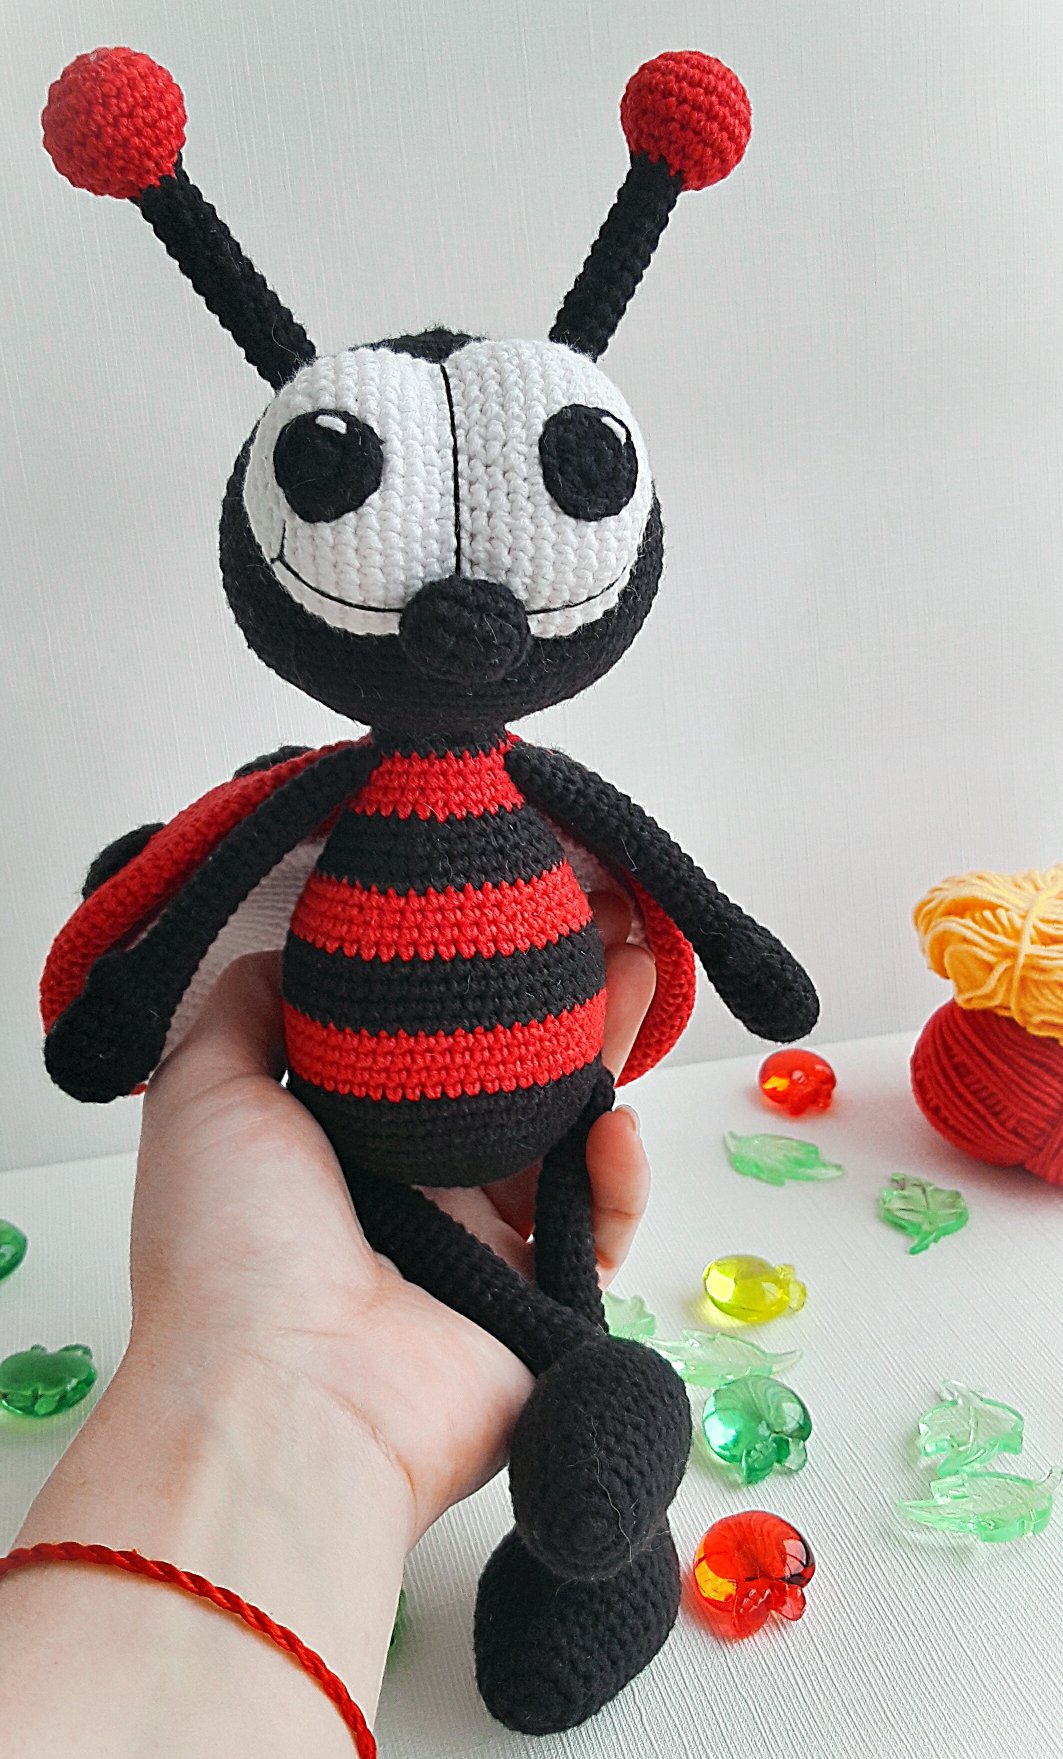 Stuffed Ladybug toy,insects toys,gifts ideas,Christmas gift for Baby, Birthday gift, Baby photo prop, nursery toys for baby and toddlers